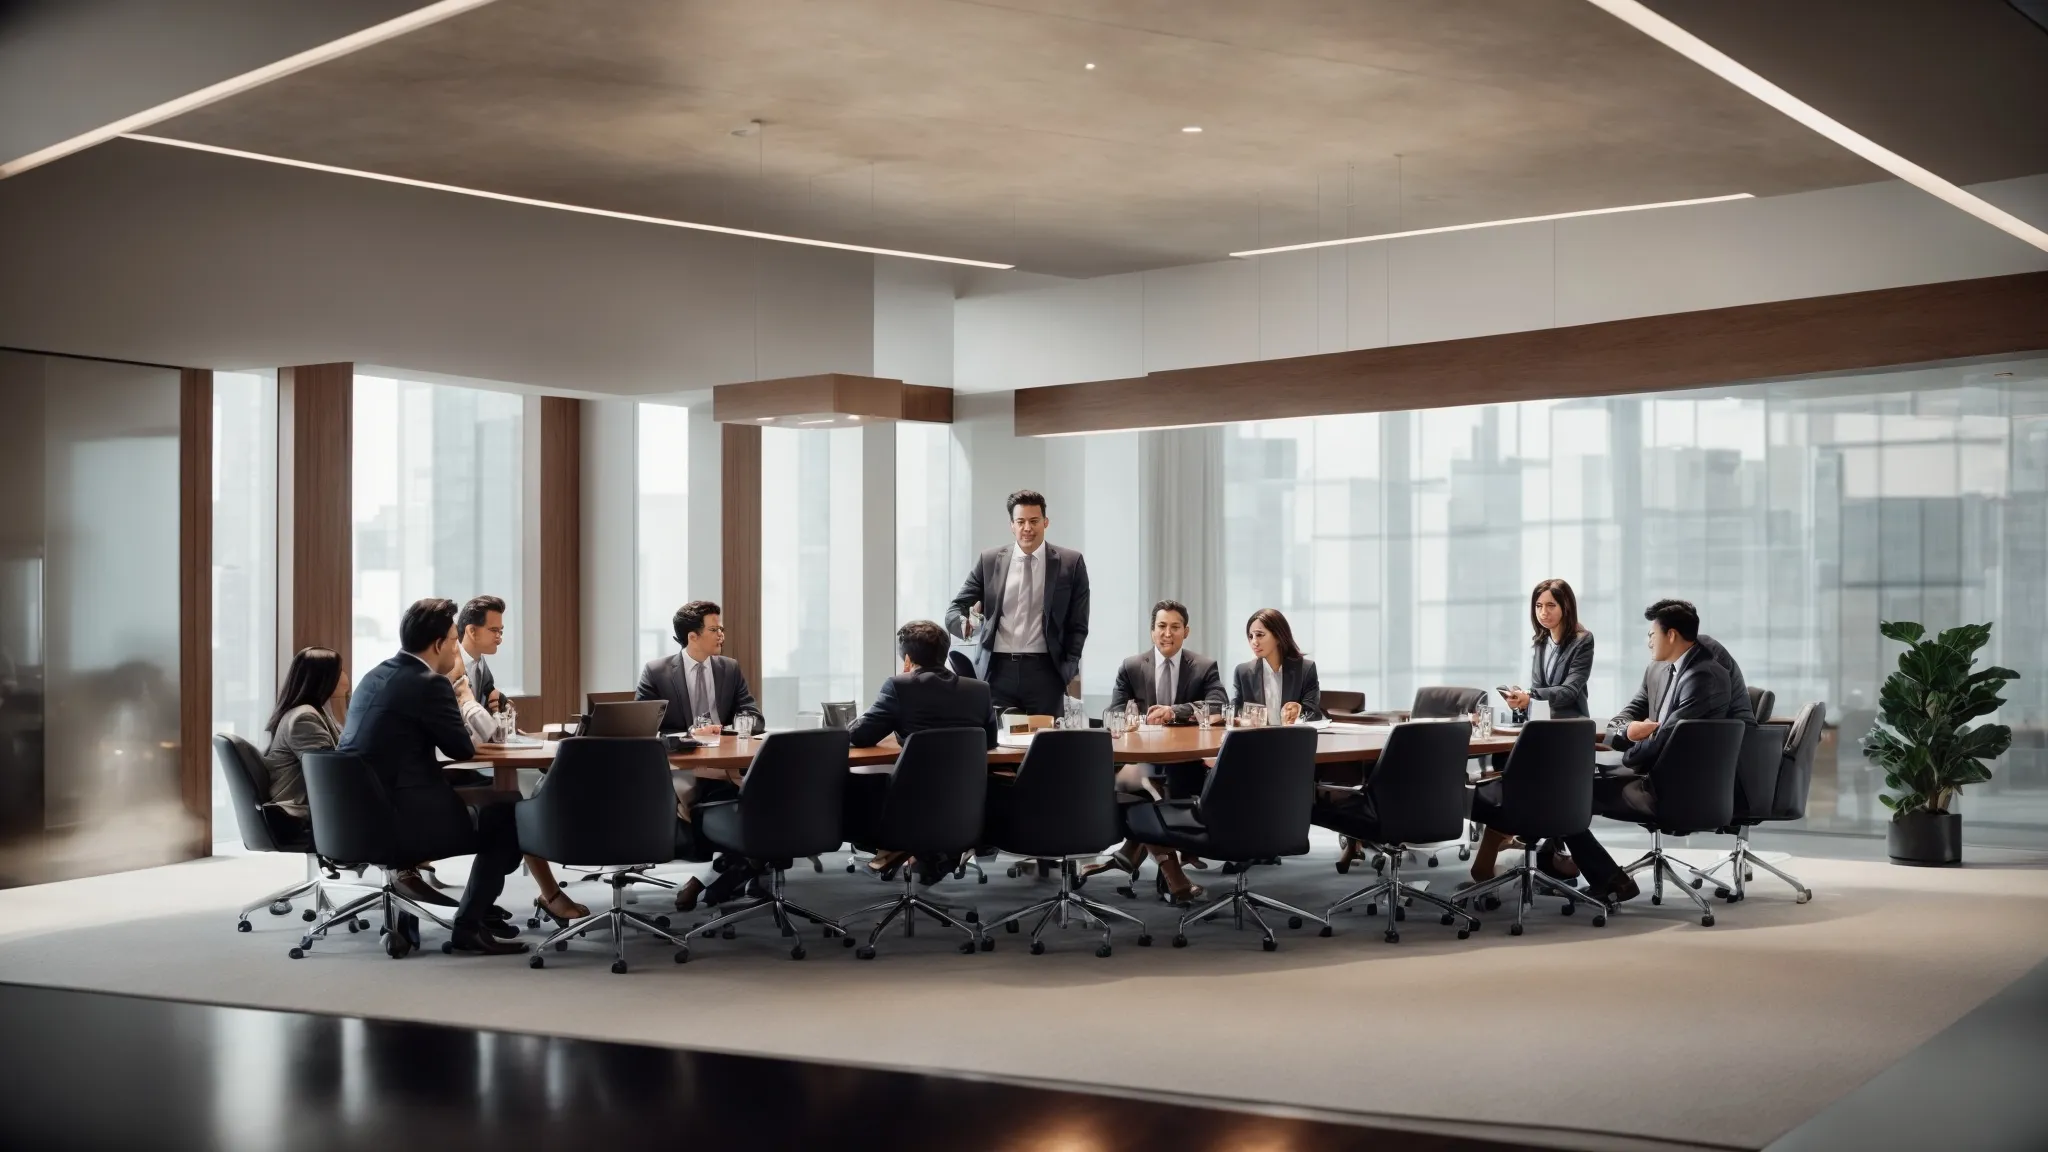 a business meeting with marketing professionals discussing strategy over a modern, sleek conference table.